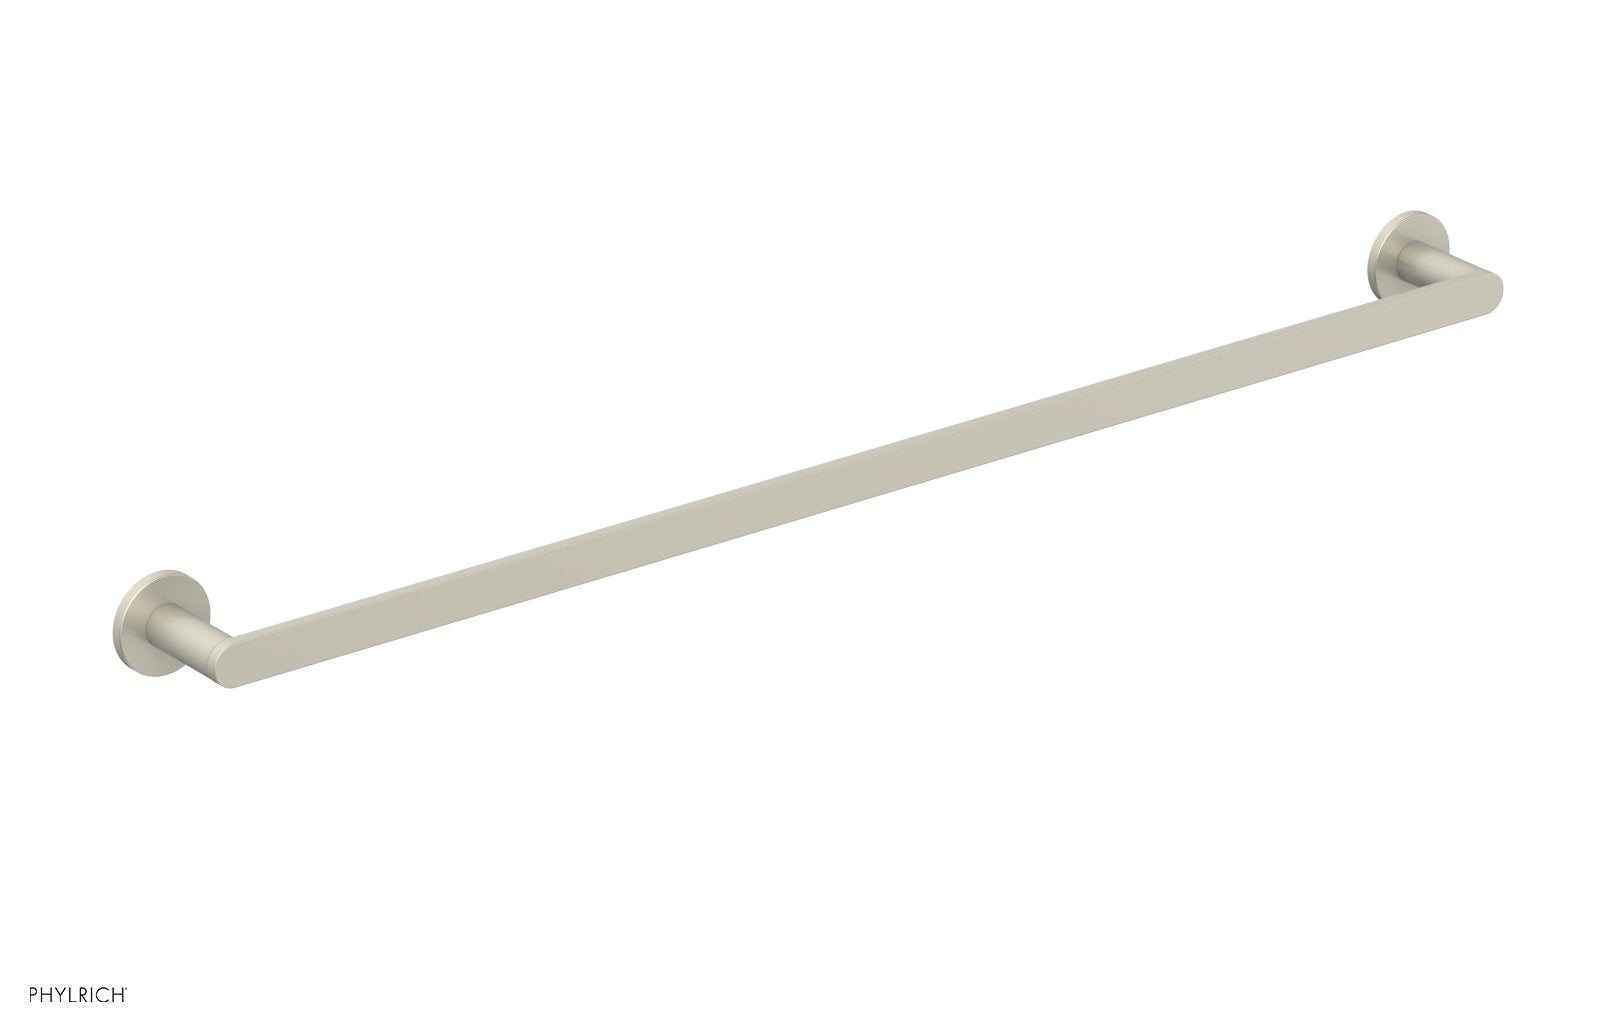 Phylrich ROND Contemporary 30" Towel Bar